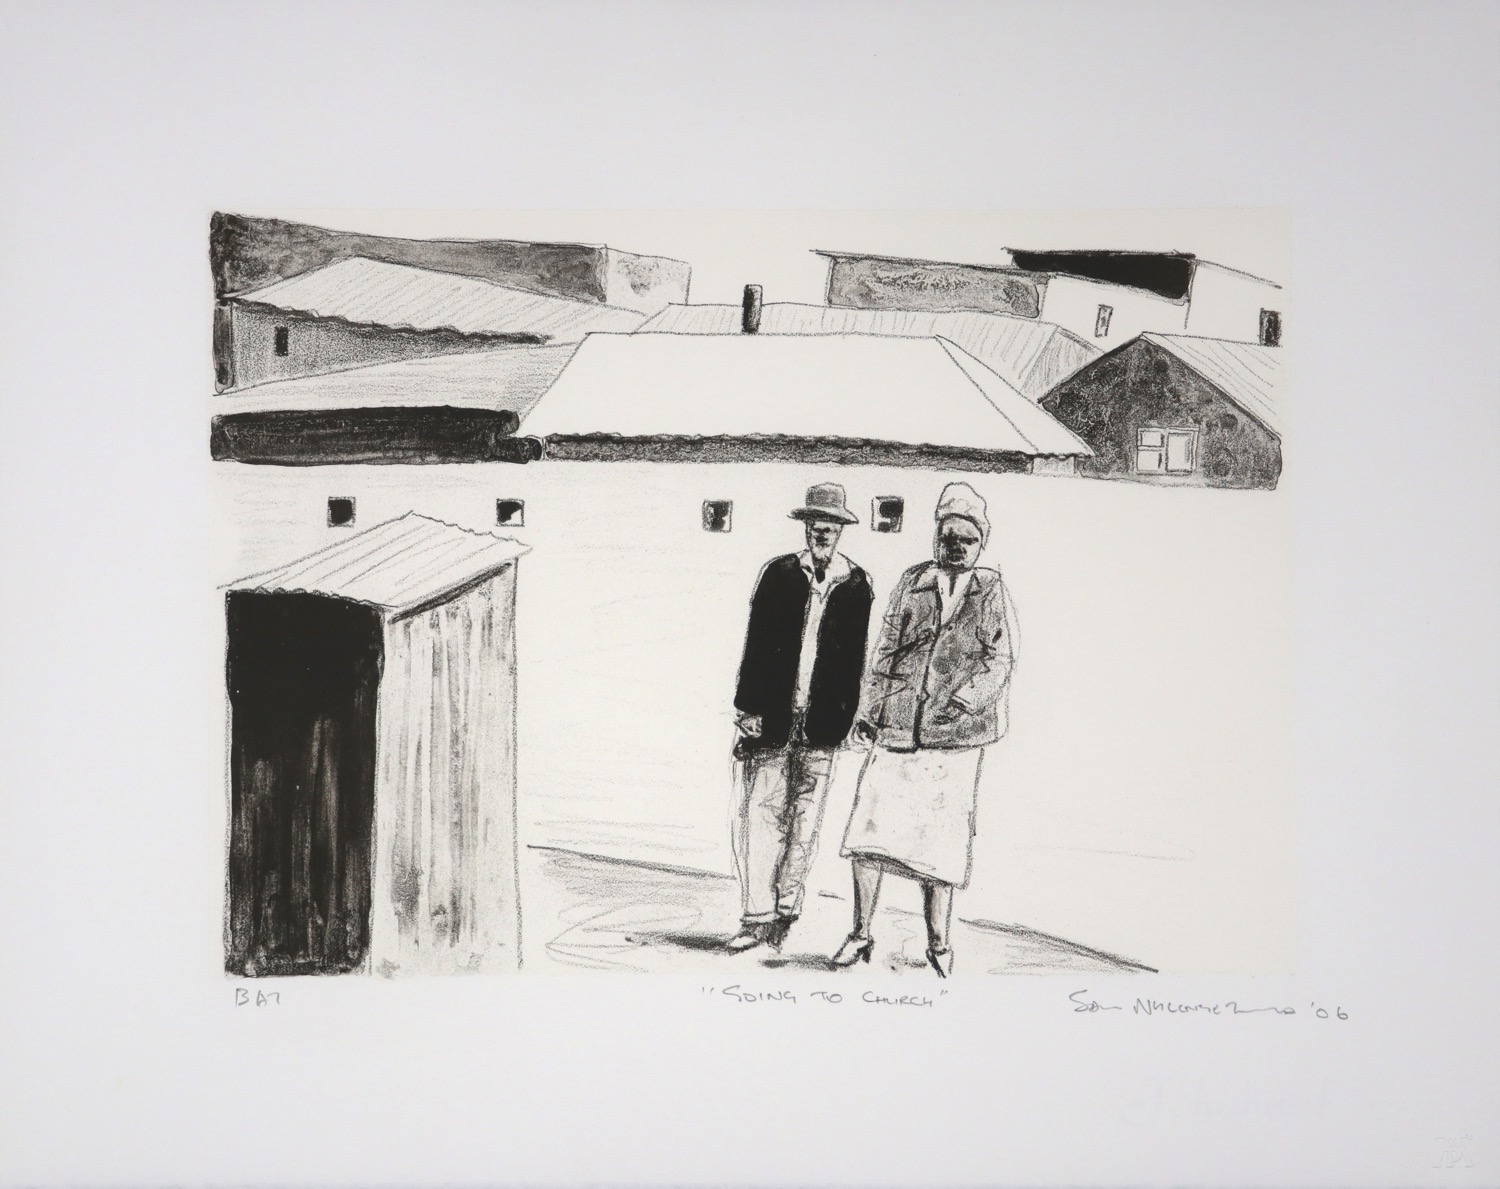 Litho of a smartly dressed couple walking to church through township streets